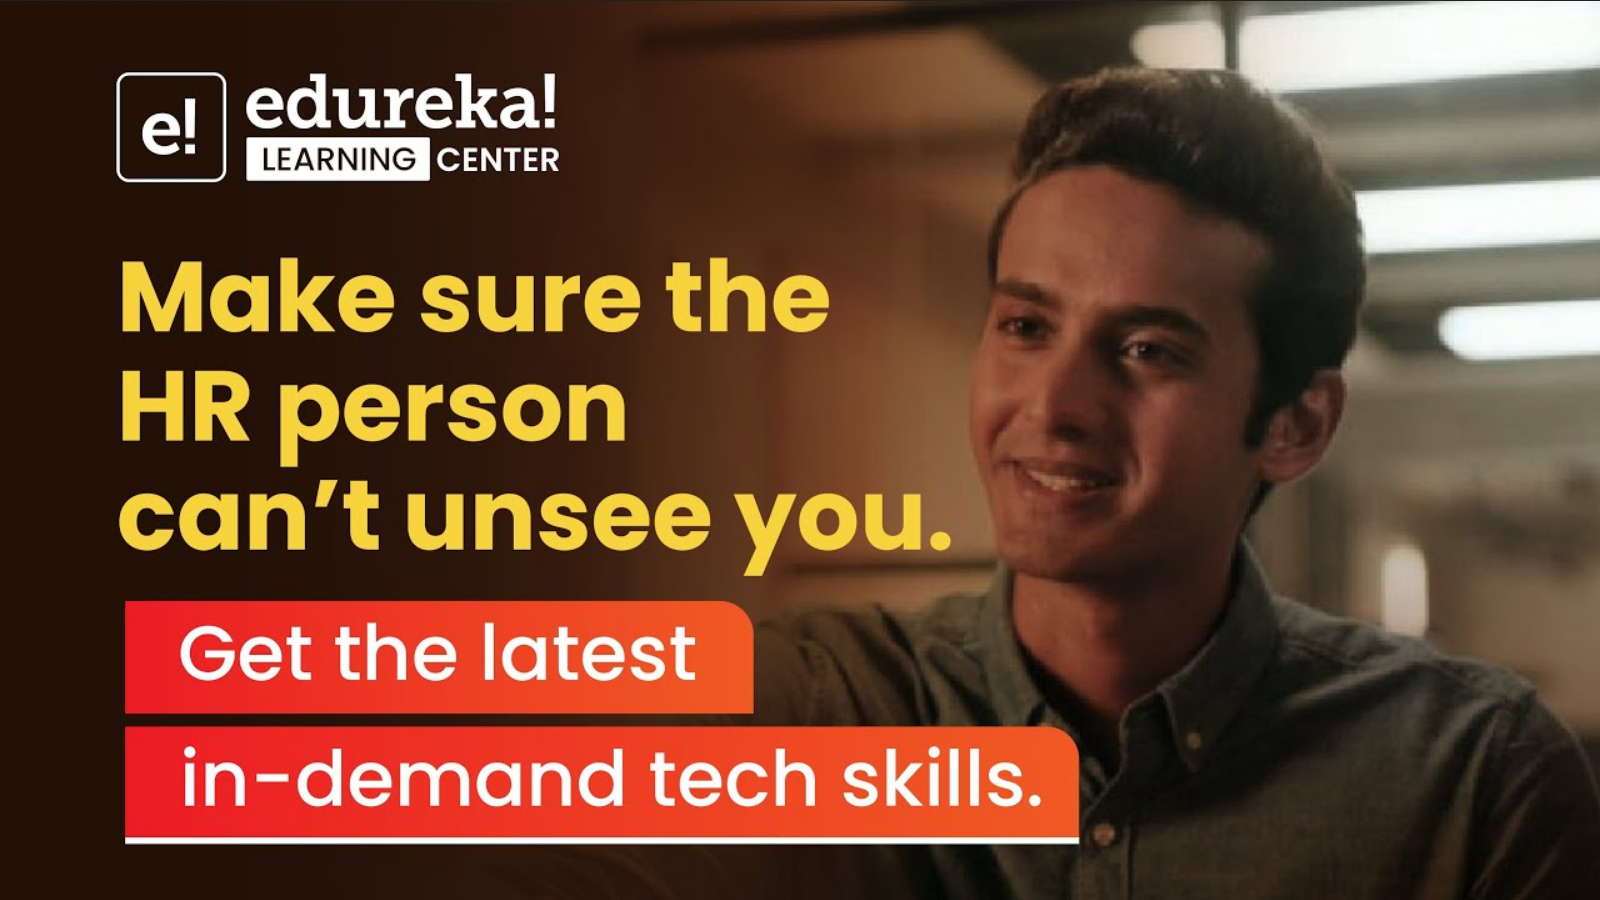 Edureka urges students to be ‘tech-ready to stay job-ready’ in new campaign